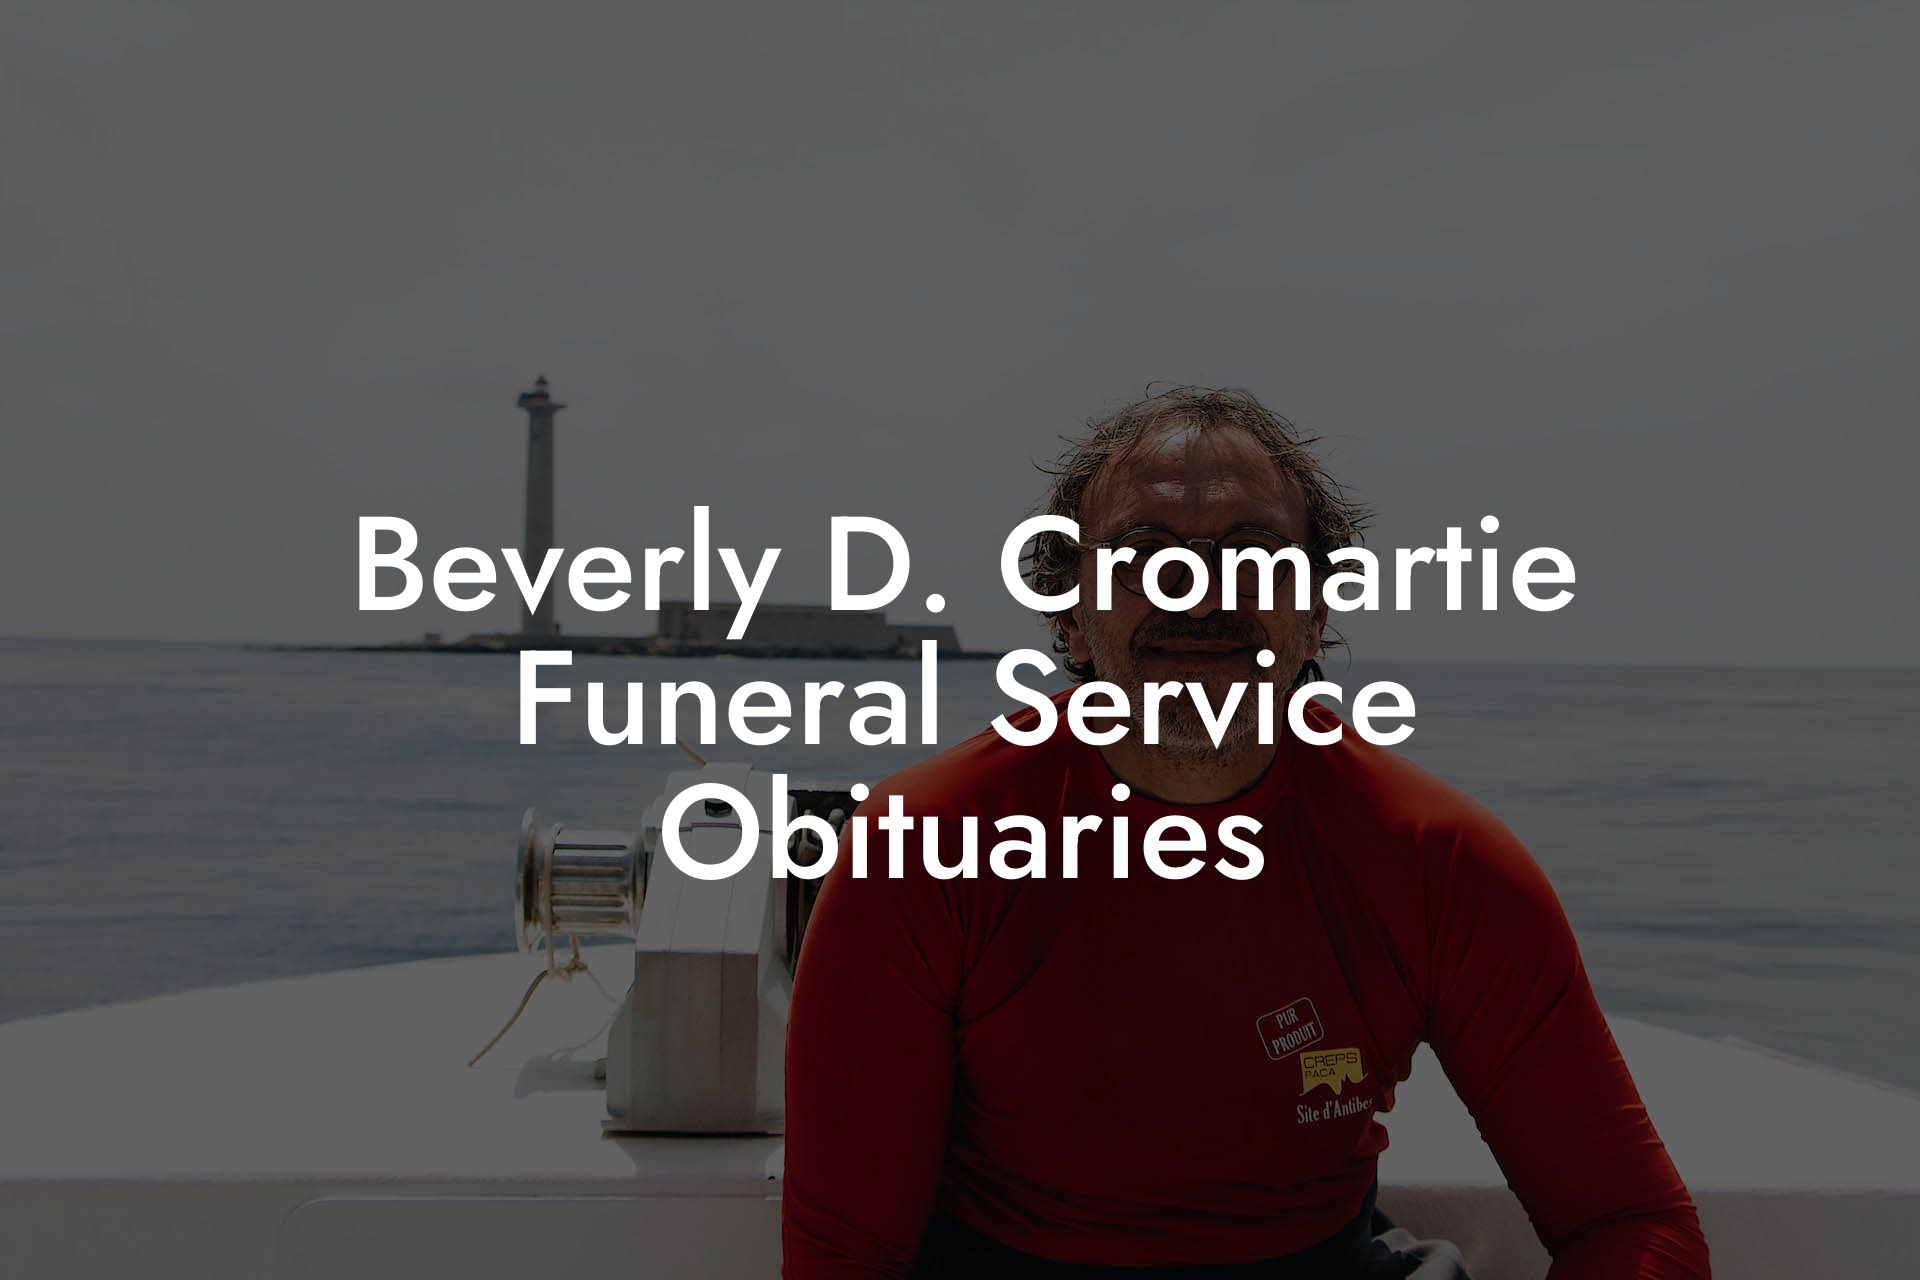 Beverly D. Cromartie Funeral Service Obituaries